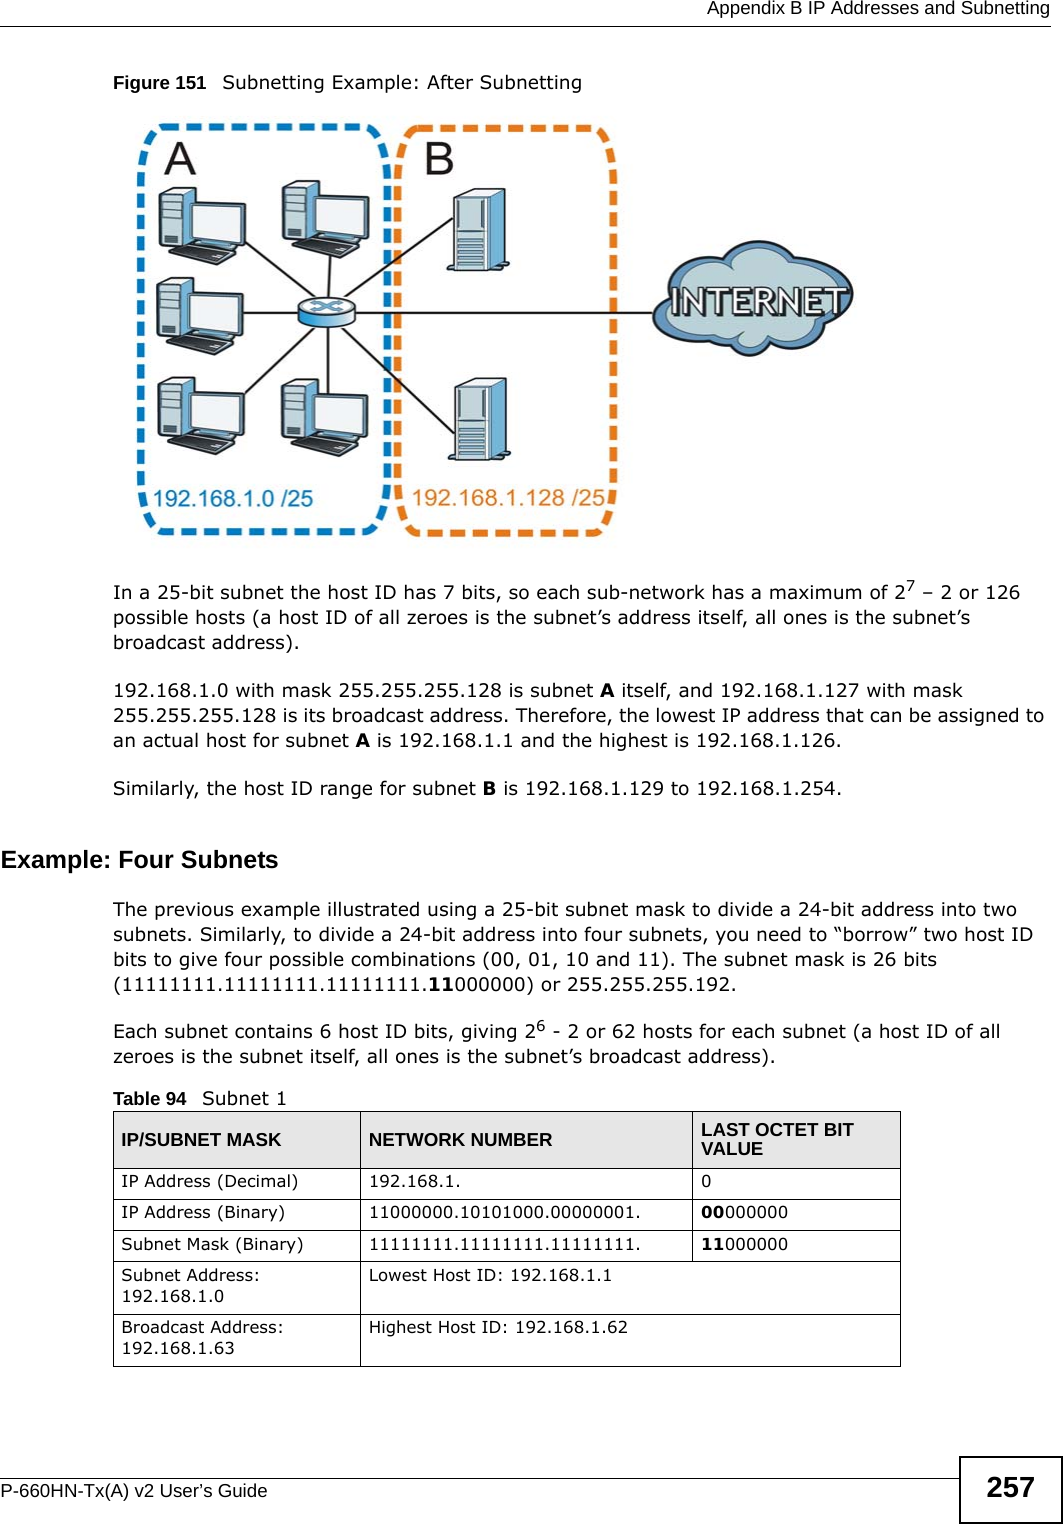  Appendix B IP Addresses and SubnettingP-660HN-Tx(A) v2 User’s Guide 257Figure 151   Subnetting Example: After SubnettingIn a 25-bit subnet the host ID has 7 bits, so each sub-network has a maximum of 27 – 2 or 126 possible hosts (a host ID of all zeroes is the subnet’s address itself, all ones is the subnet’s broadcast address).192.168.1.0 with mask 255.255.255.128 is subnet A itself, and 192.168.1.127 with mask 255.255.255.128 is its broadcast address. Therefore, the lowest IP address that can be assigned to an actual host for subnet A is 192.168.1.1 and the highest is 192.168.1.126. Similarly, the host ID range for subnet B is 192.168.1.129 to 192.168.1.254.Example: Four Subnets The previous example illustrated using a 25-bit subnet mask to divide a 24-bit address into two subnets. Similarly, to divide a 24-bit address into four subnets, you need to “borrow” two host ID bits to give four possible combinations (00, 01, 10 and 11). The subnet mask is 26 bits (11111111.11111111.11111111.11000000) or 255.255.255.192. Each subnet contains 6 host ID bits, giving 26 - 2 or 62 hosts for each subnet (a host ID of all zeroes is the subnet itself, all ones is the subnet’s broadcast address). Table 94   Subnet 1IP/SUBNET MASK NETWORK NUMBER LAST OCTET BIT VALUEIP Address (Decimal) 192.168.1. 0IP Address (Binary) 11000000.10101000.00000001. 00000000Subnet Mask (Binary) 11111111.11111111.11111111. 11000000Subnet Address: 192.168.1.0Lowest Host ID: 192.168.1.1Broadcast Address: 192.168.1.63Highest Host ID: 192.168.1.62